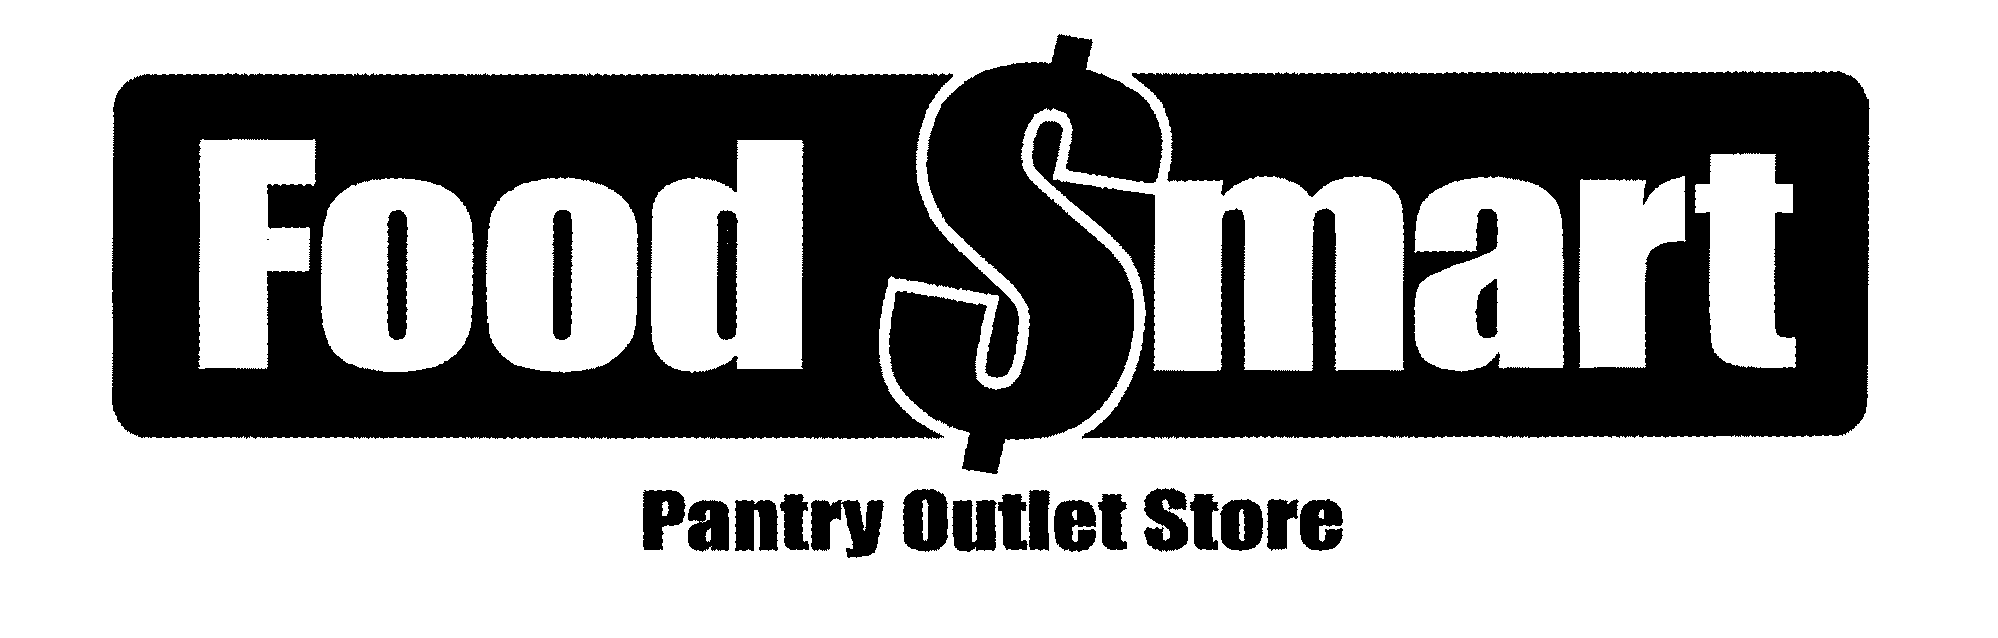  FOOD $MART PANTRY OUTLET STORE